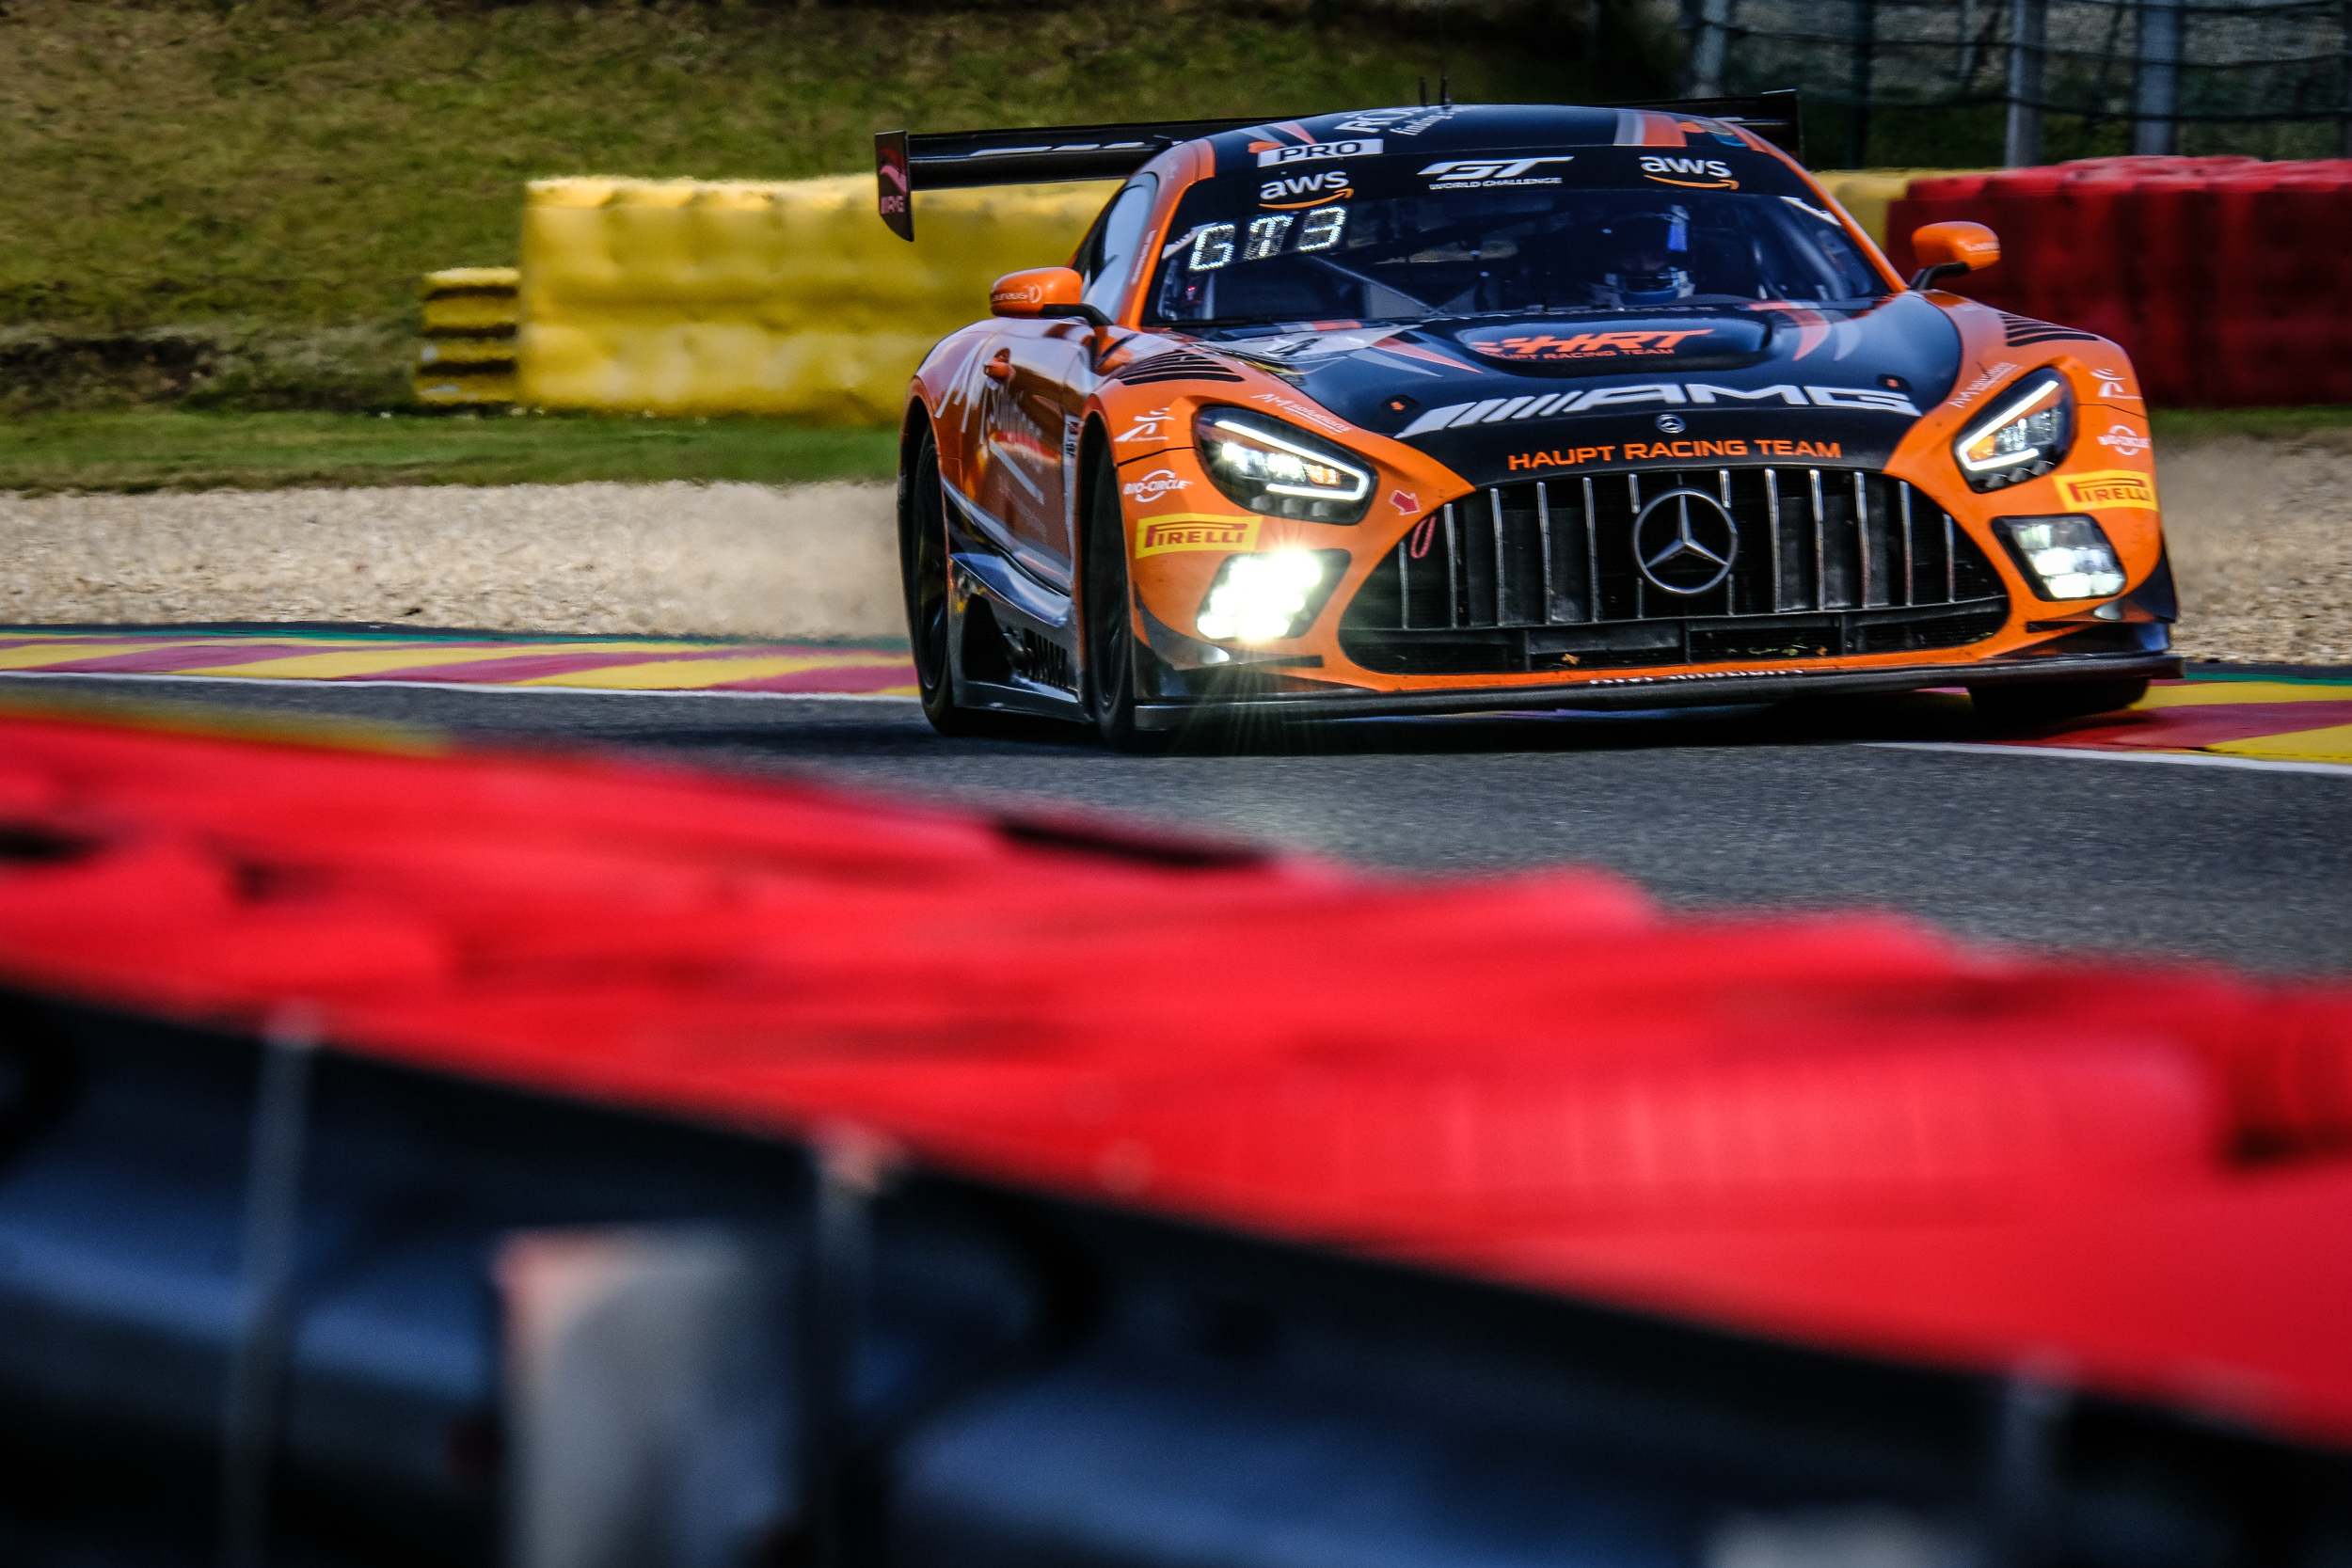 Mercedes Amg With Strong Line Up For Total 24 Hours Of Spa Fanatec Gt World Challenge Europe Powered By Aws